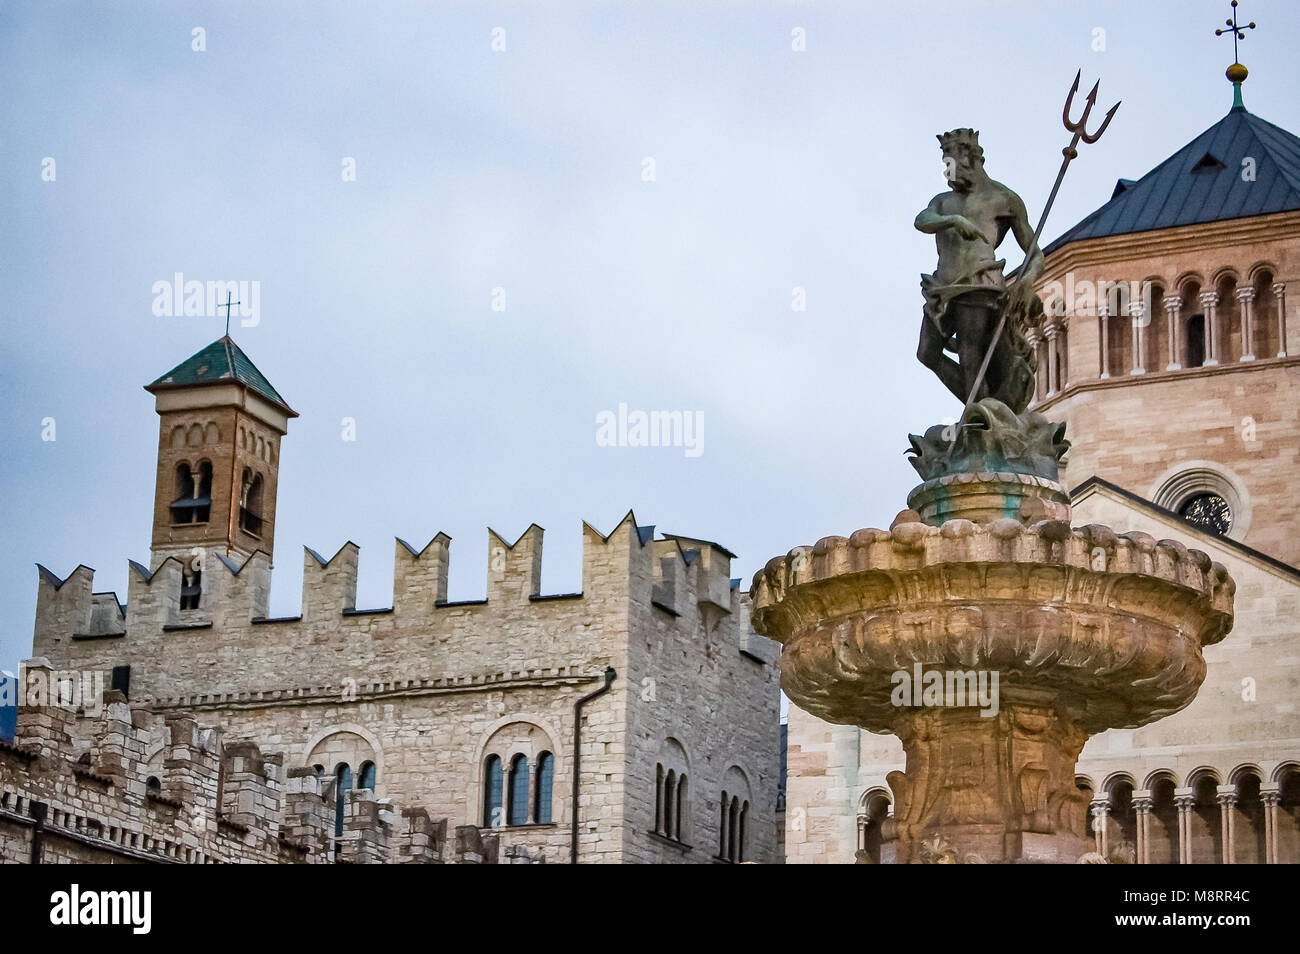 Main square Piazza Duomo, with clock tower and the Late Baroque Fountain of Neptune. City in Trento Italy Stock Photo